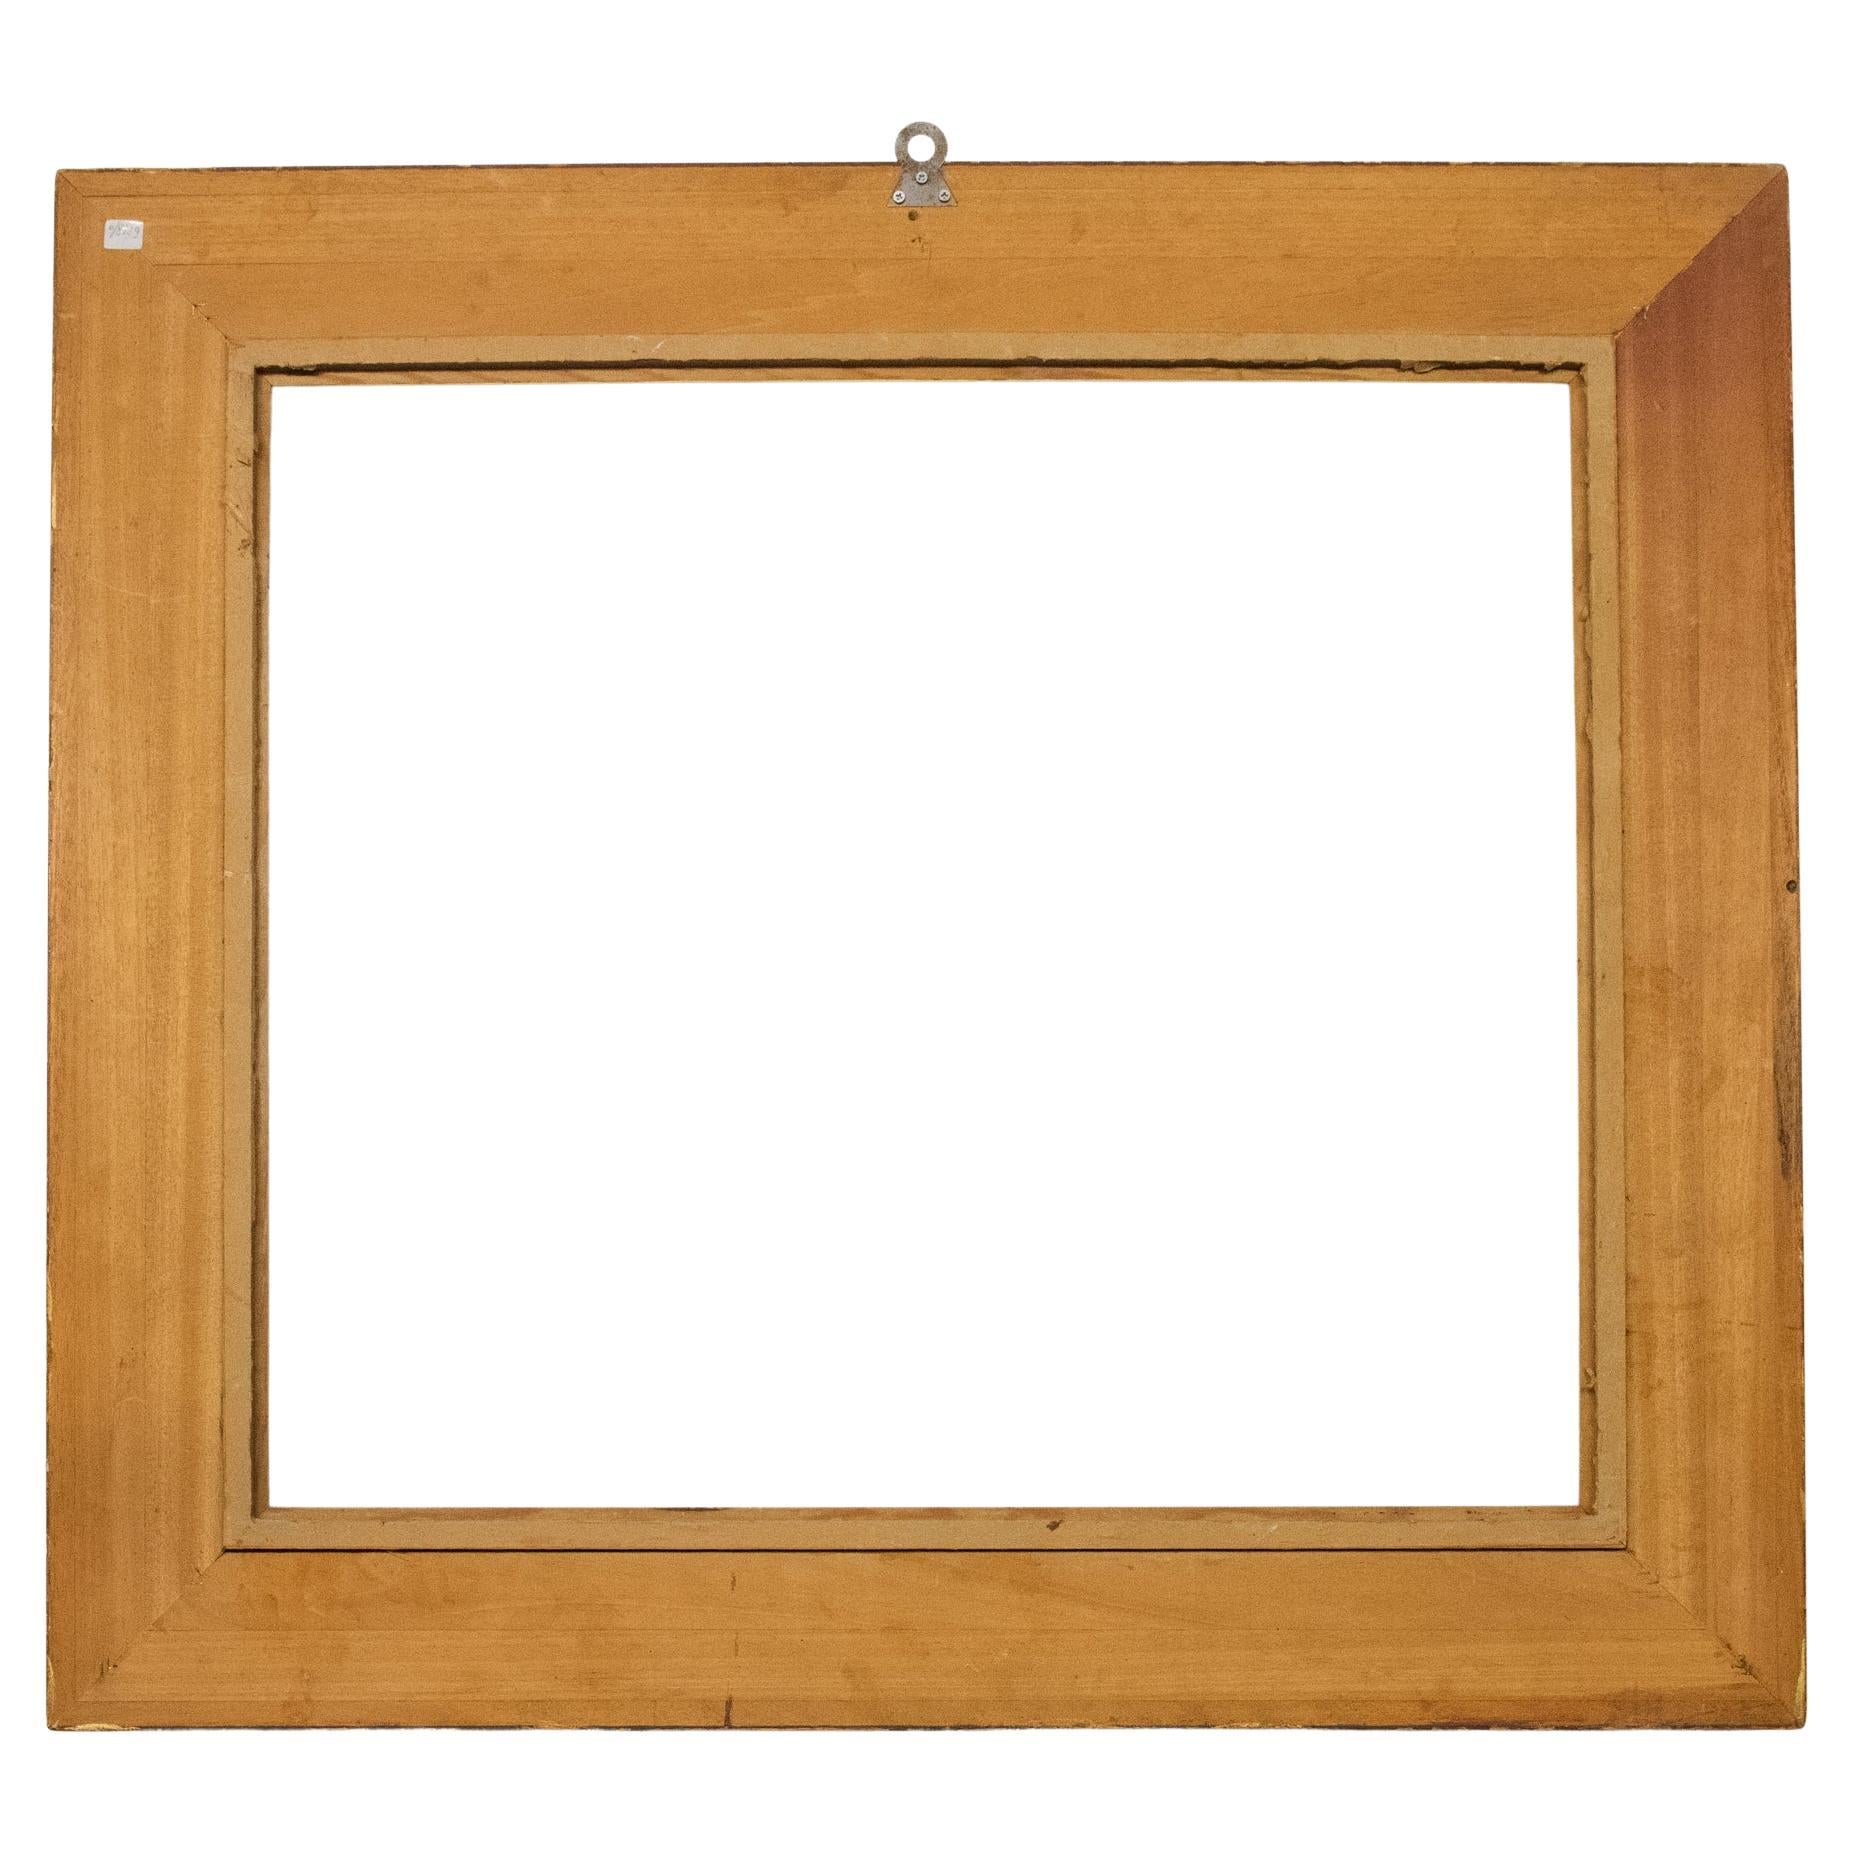 O/8129 - Antique large giltwood frame, perfect for a painting or for a mirror. I have other ones, that I'm publishing gradually with interesting prices because I want to close my activities.